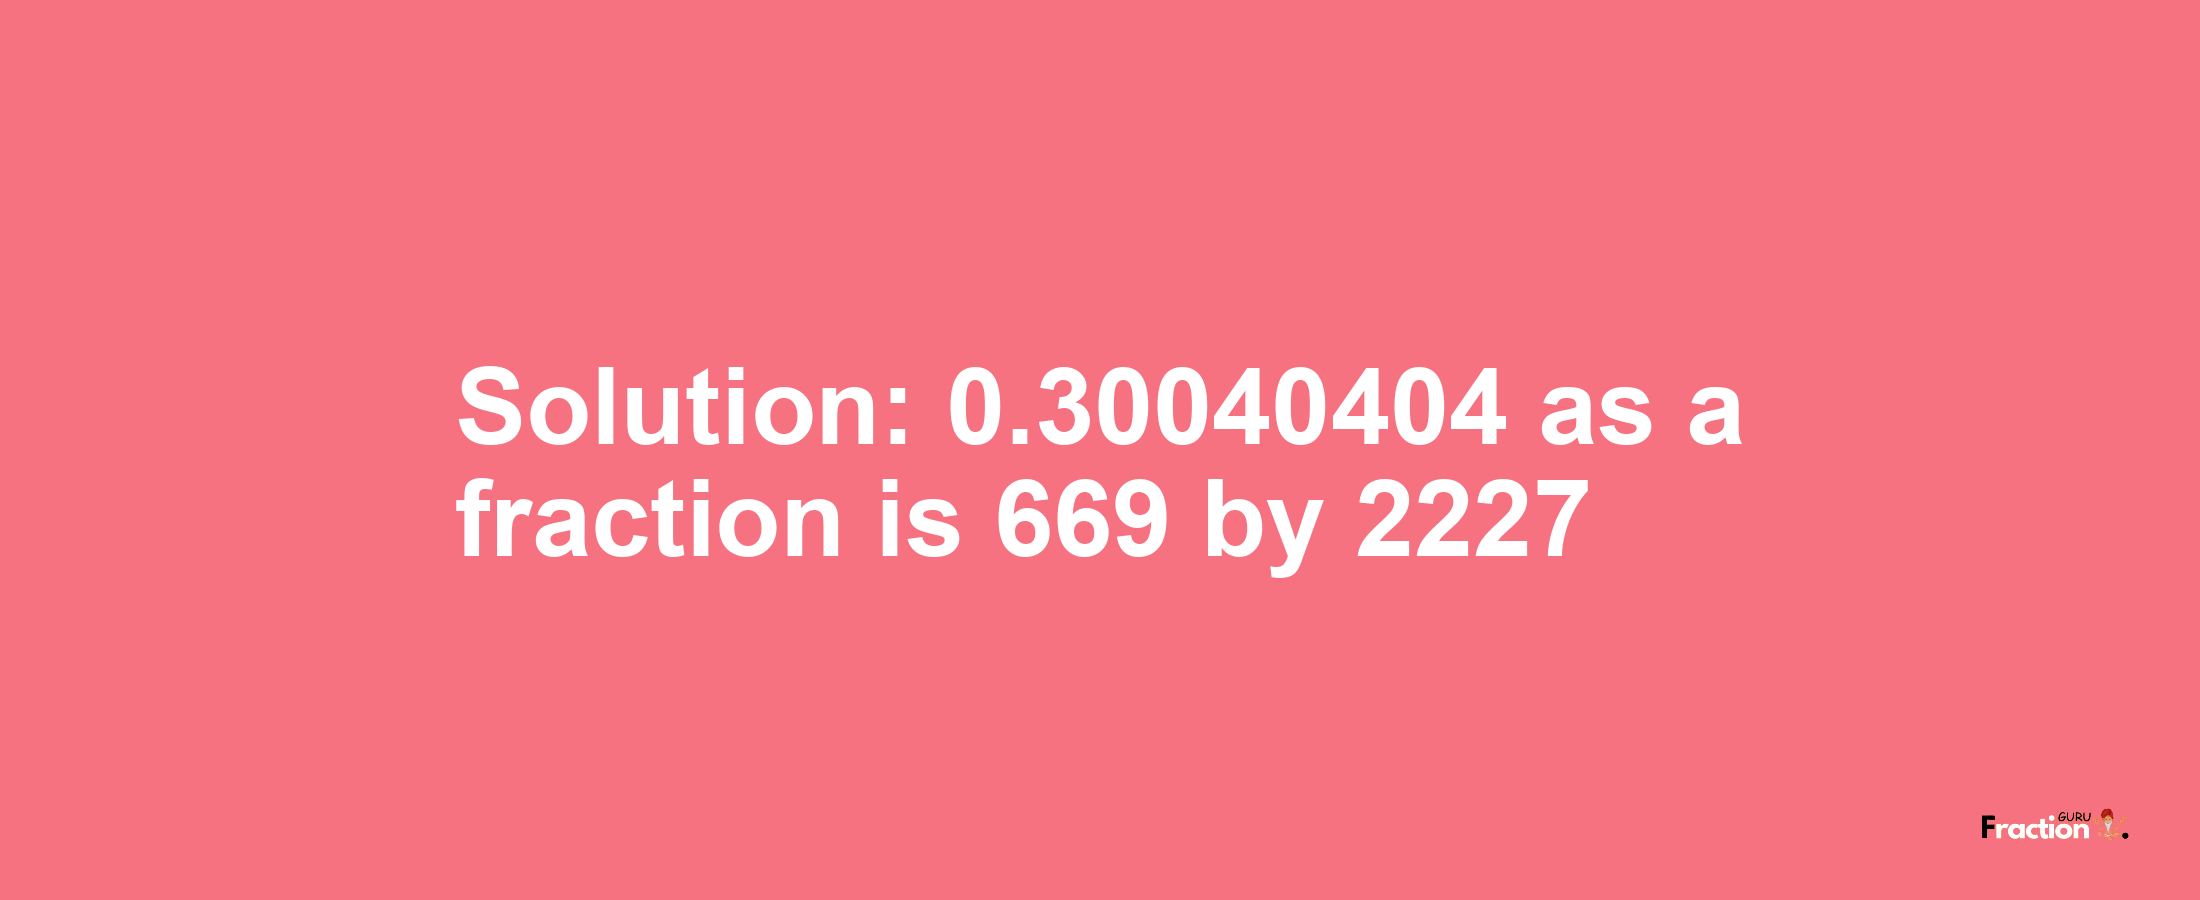 Solution:0.30040404 as a fraction is 669/2227